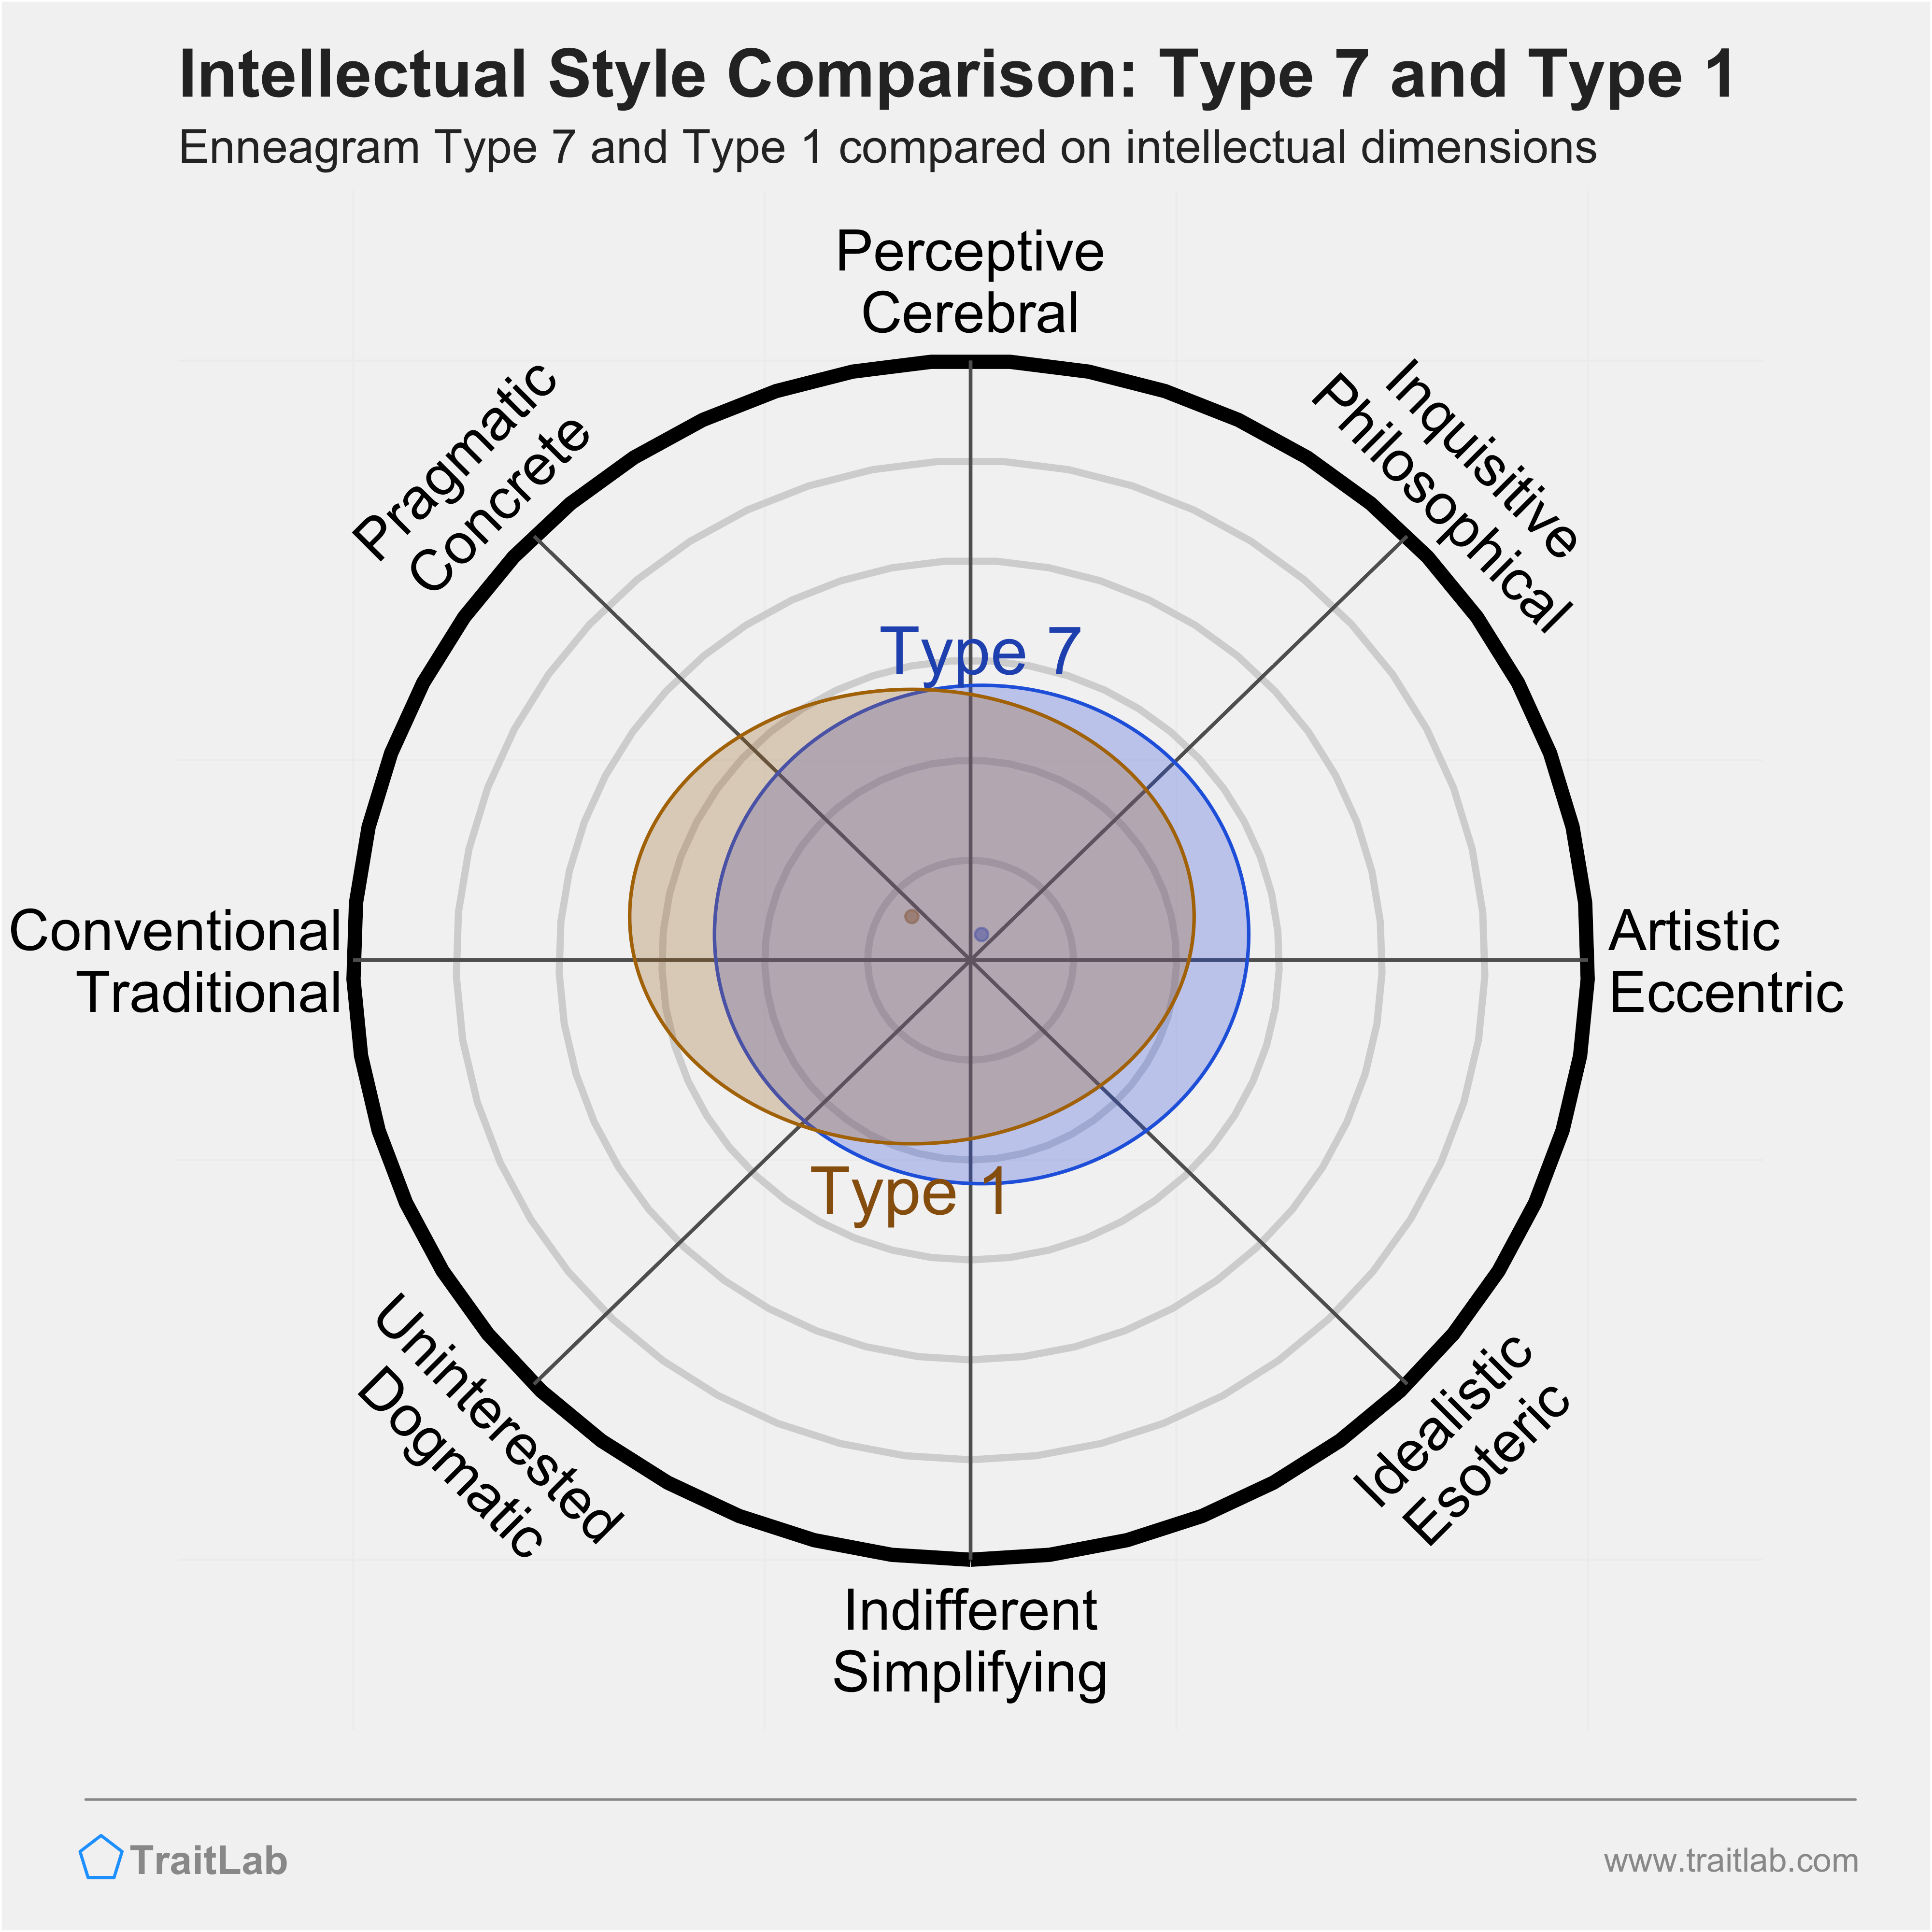 Type 7 and Type 1 comparison across intellectual dimensions